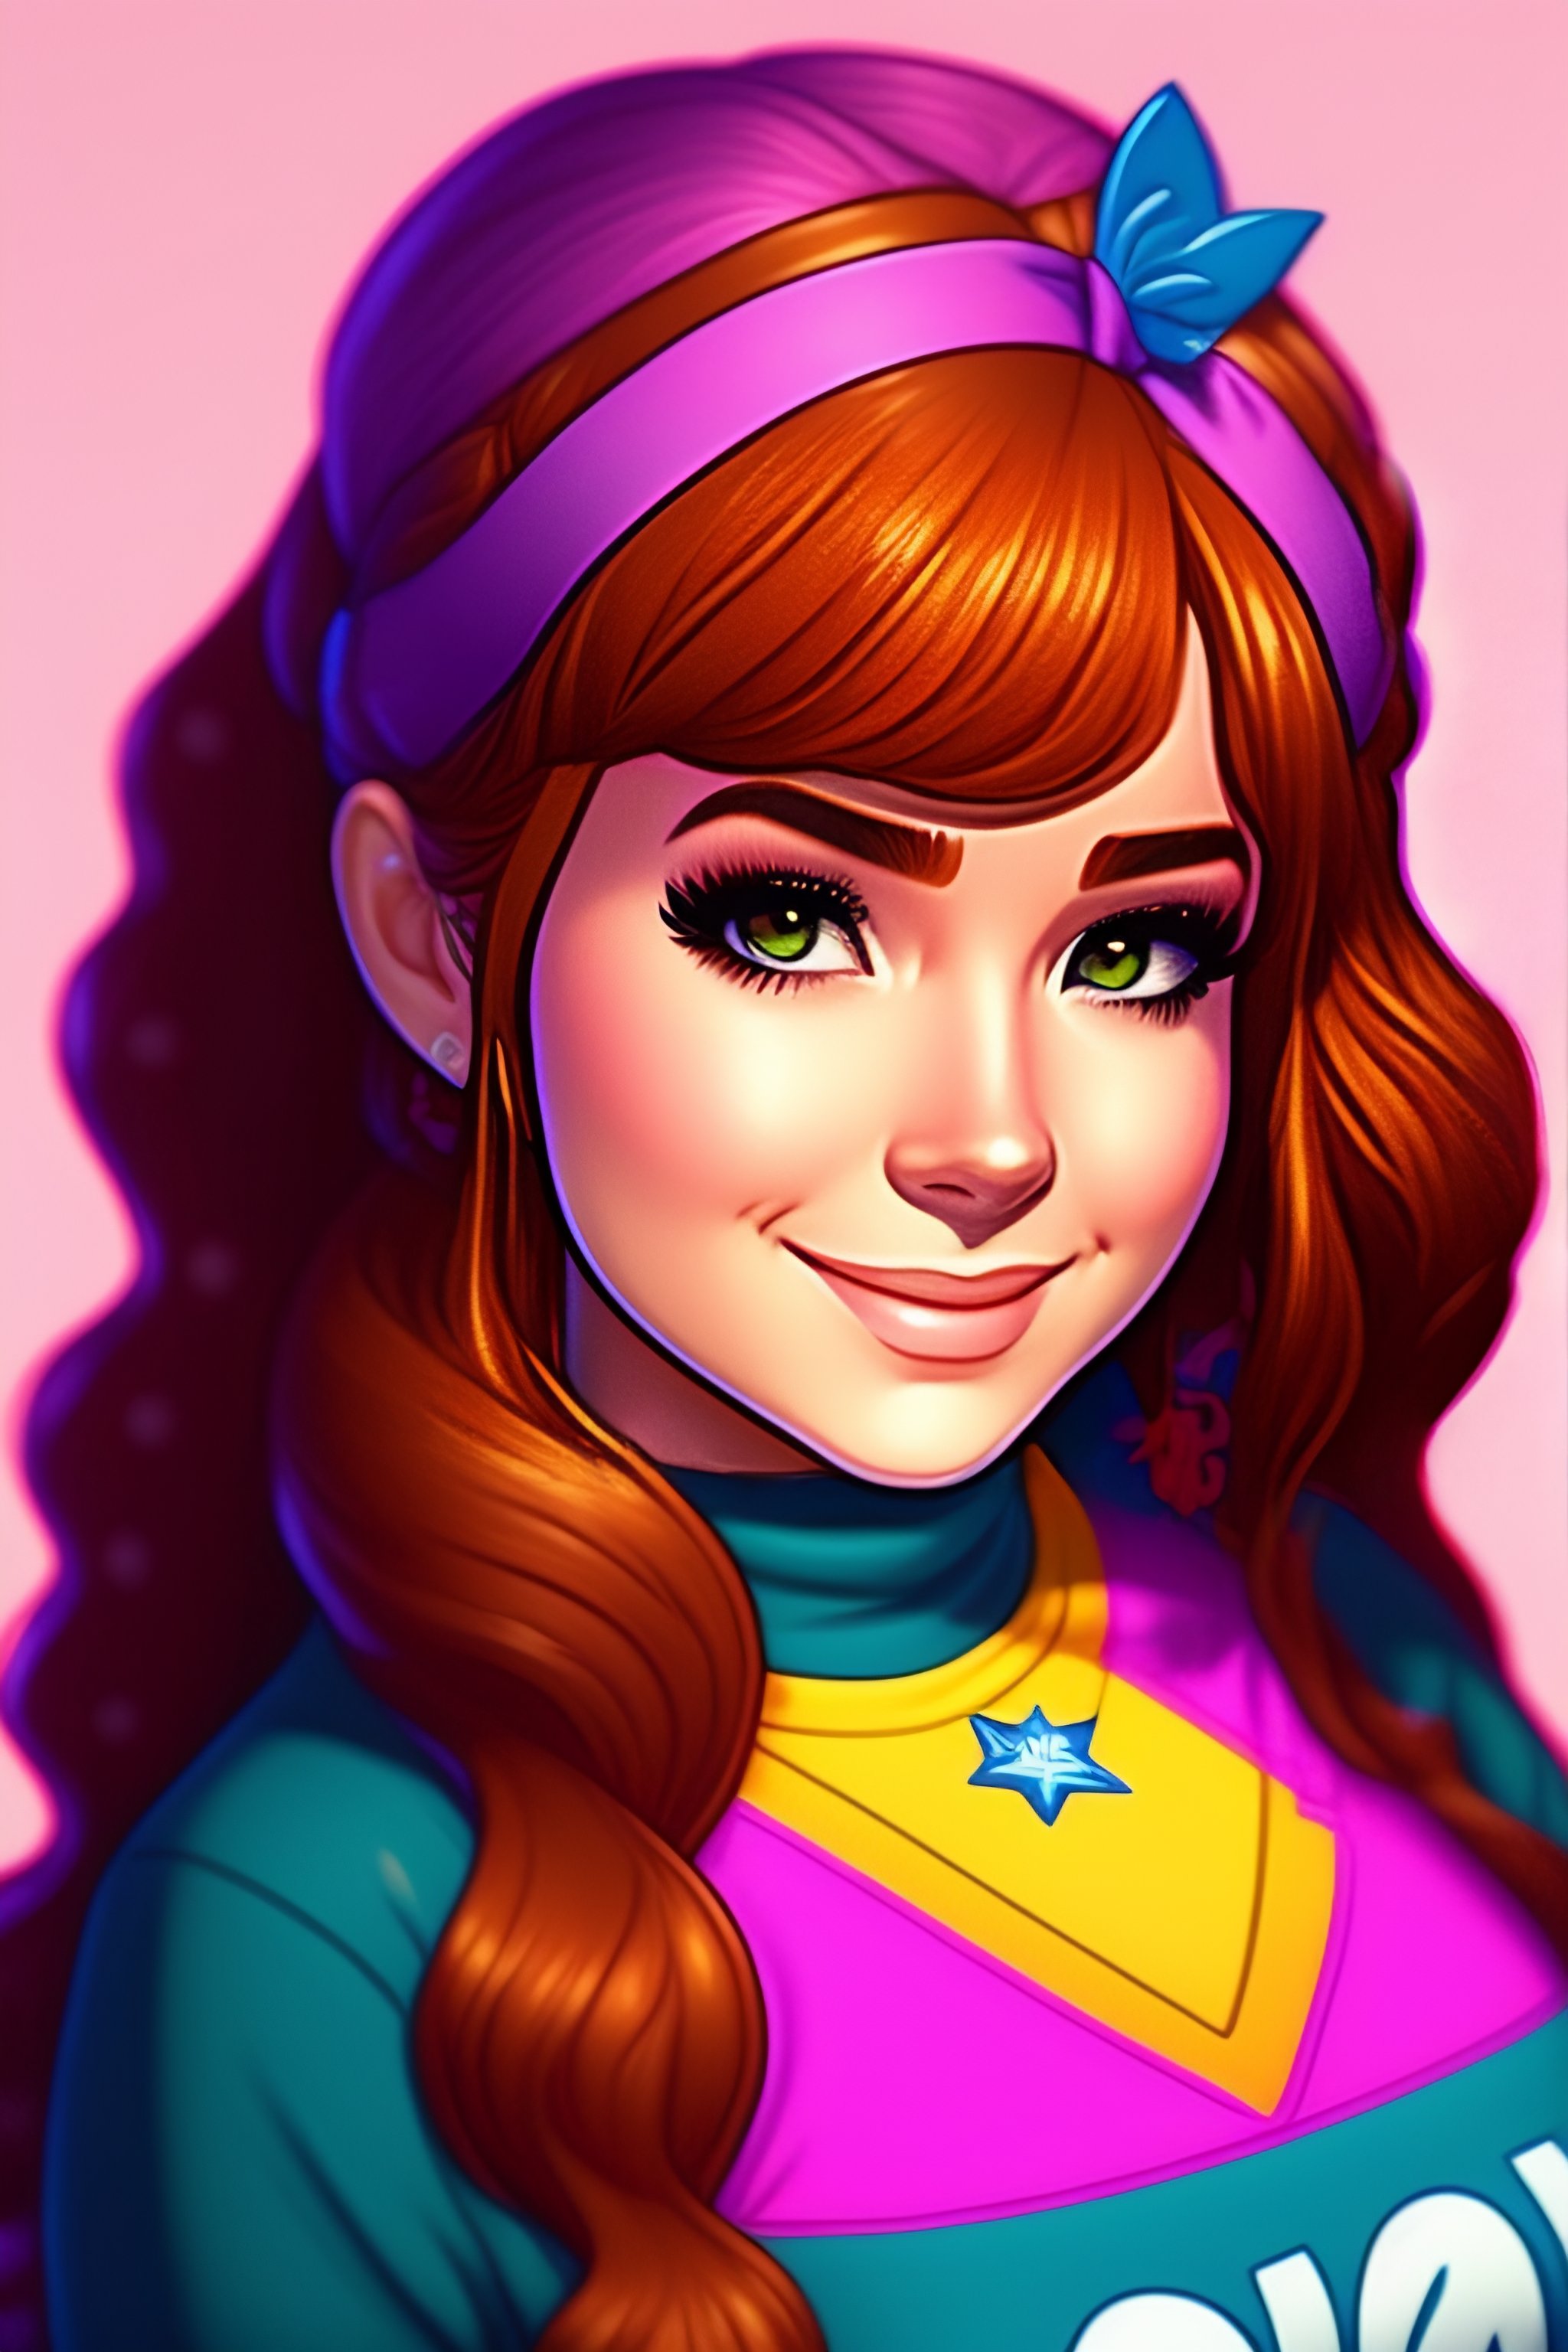 Lexica - Mabel pines from gravity falls,